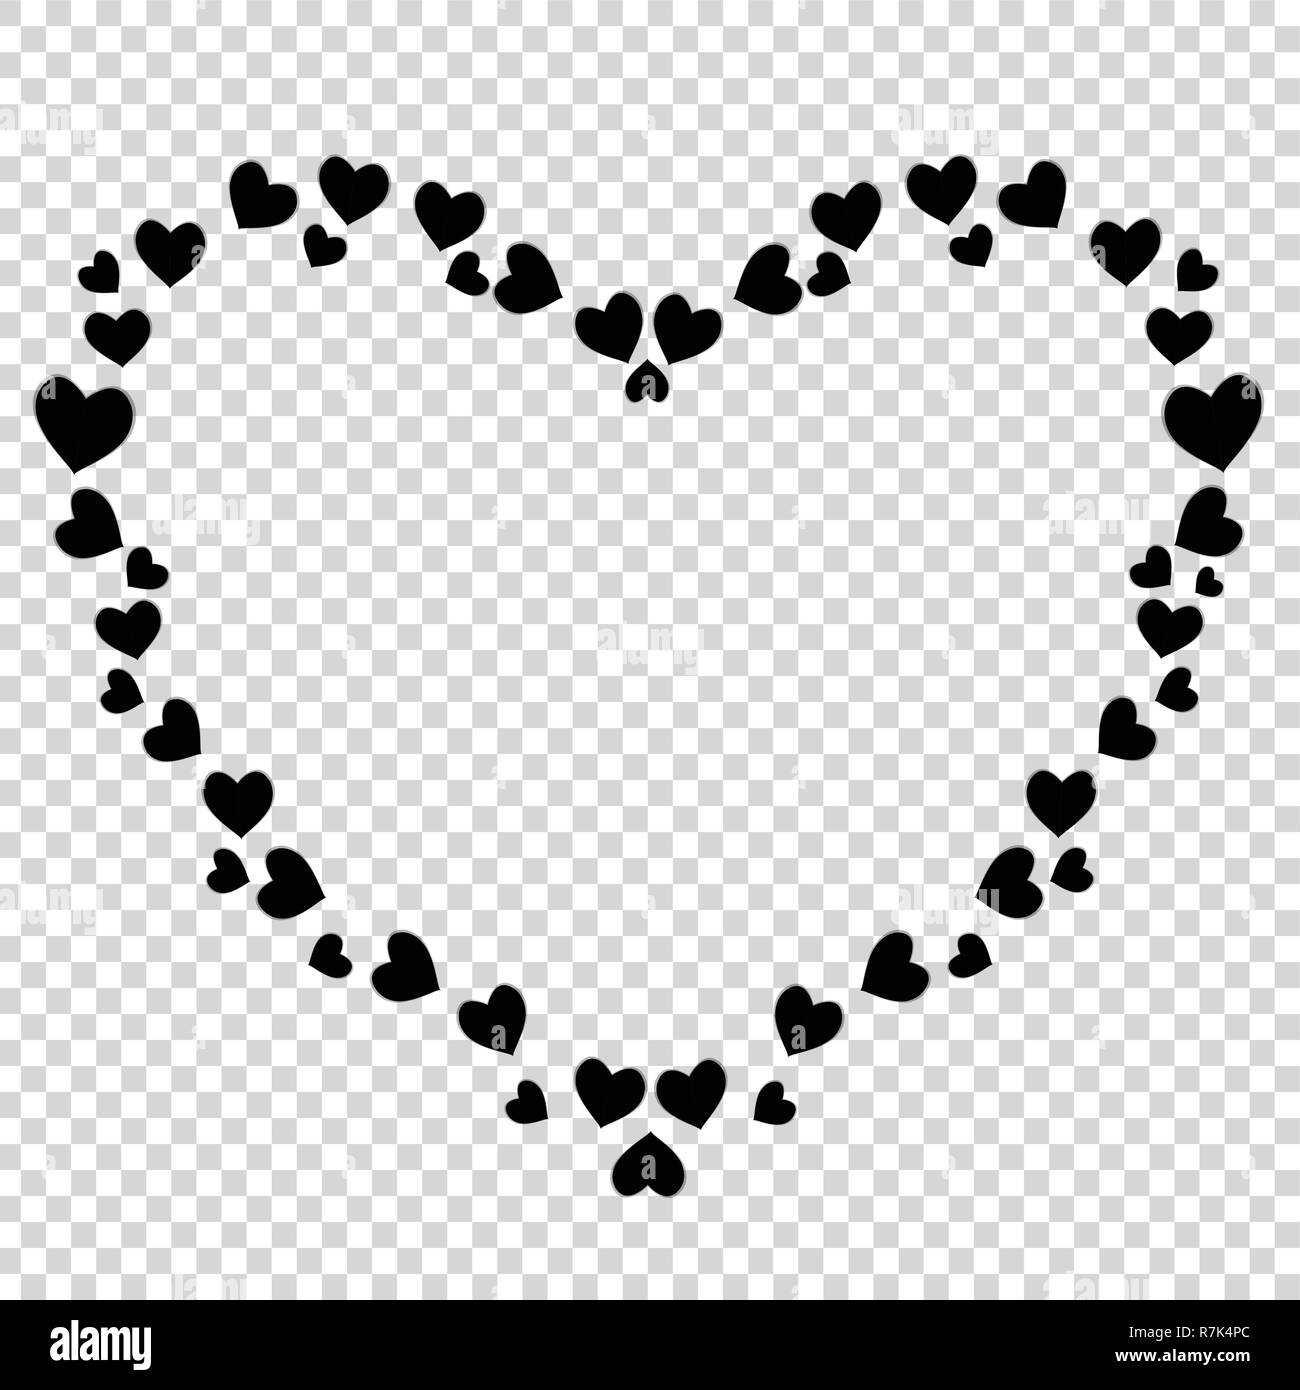 Vector cute black love hearts photo frame for valentines, wedding romance design. Template for greeting card, invitation, scrapbook element. Heart sha Stock Vector